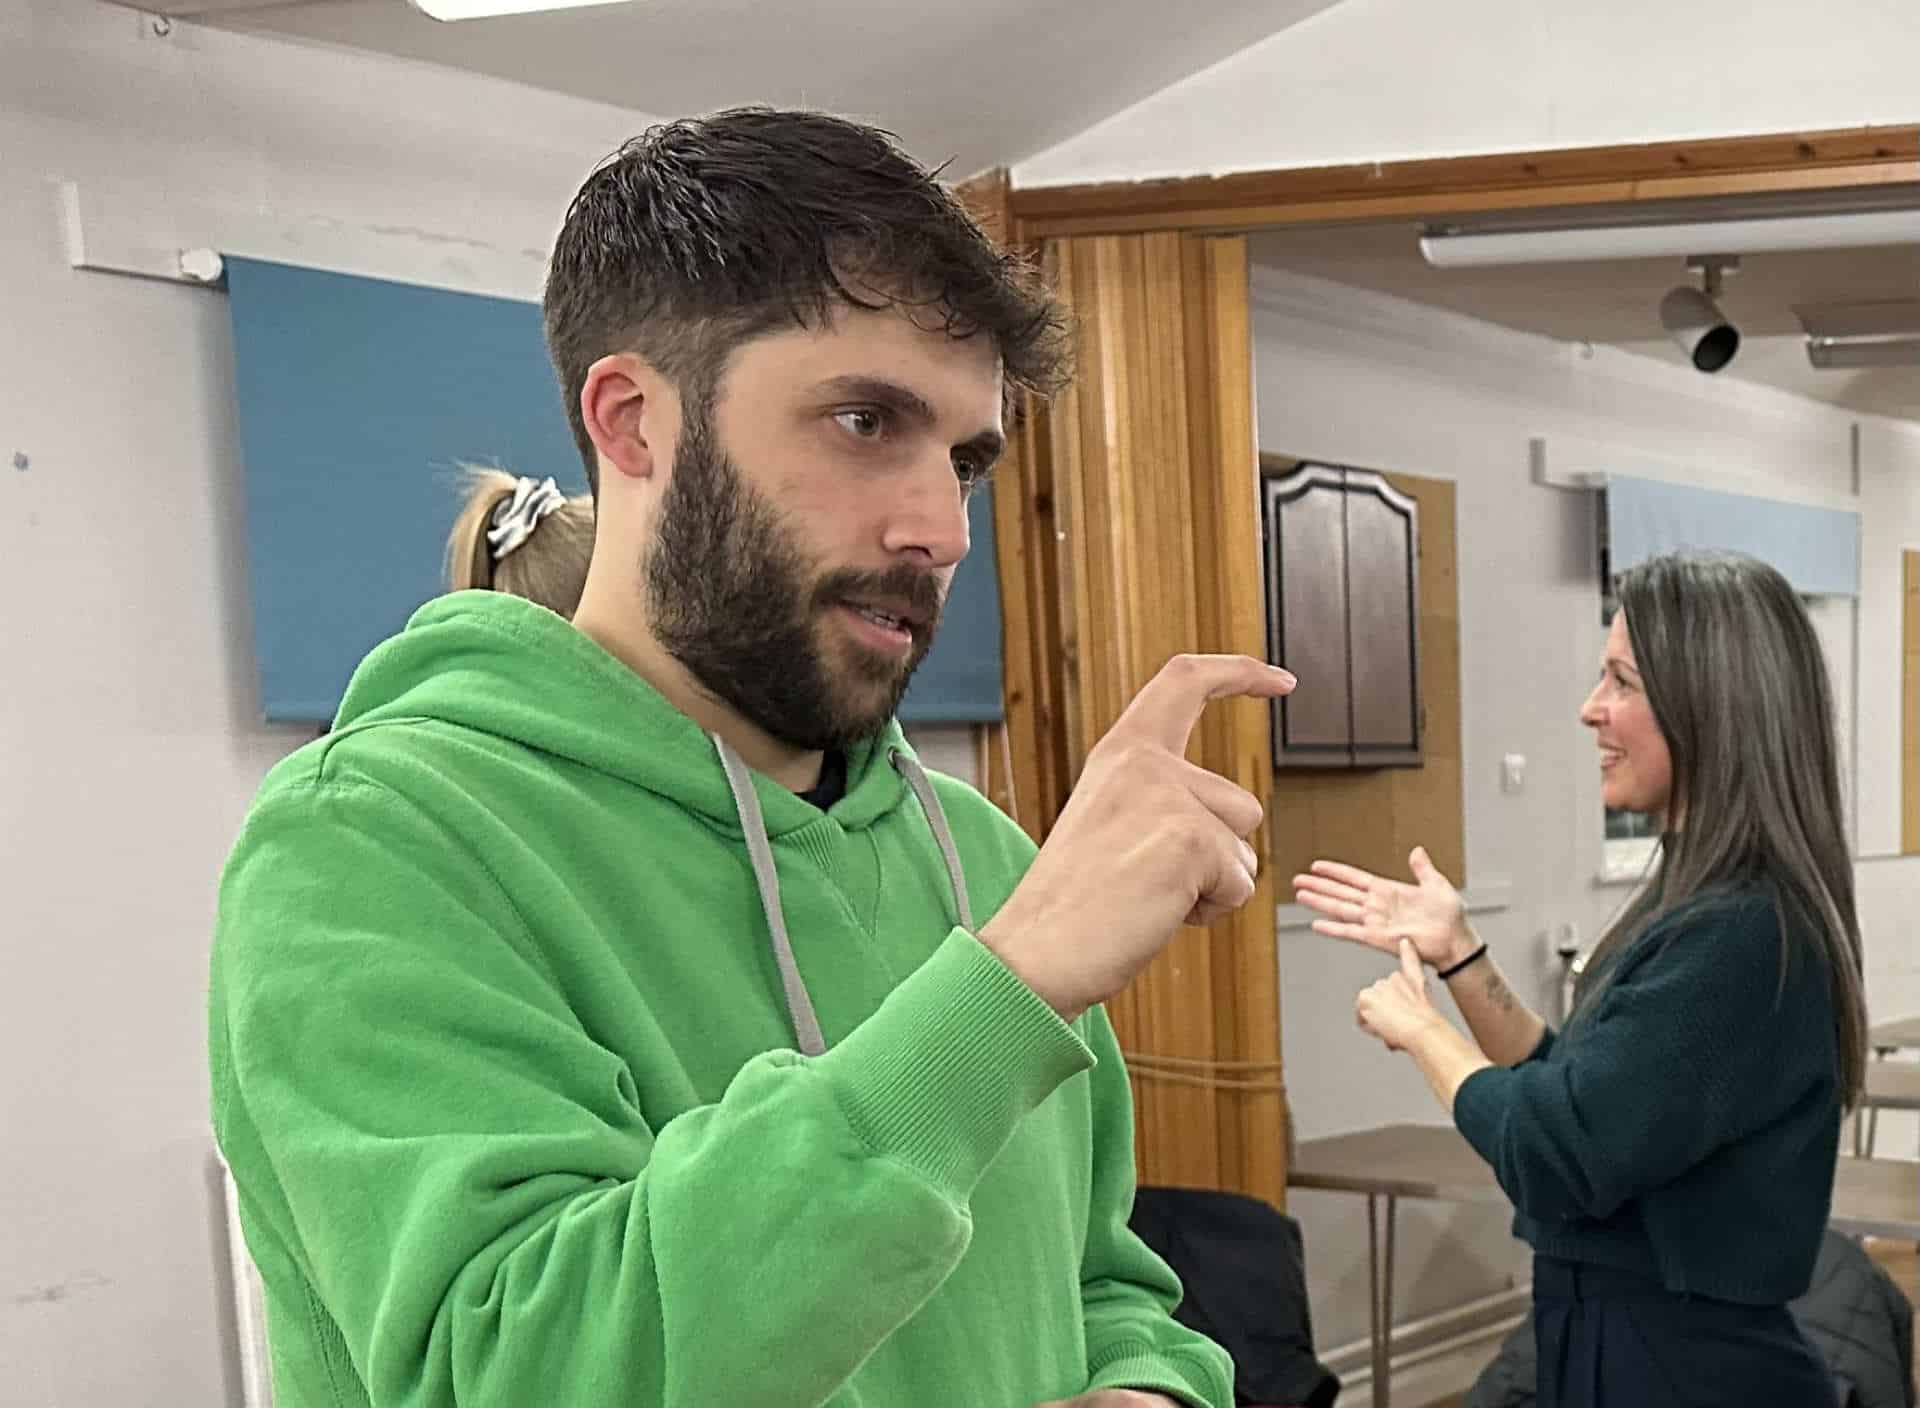 A man in a green hoodie is talking to a woman in a room.